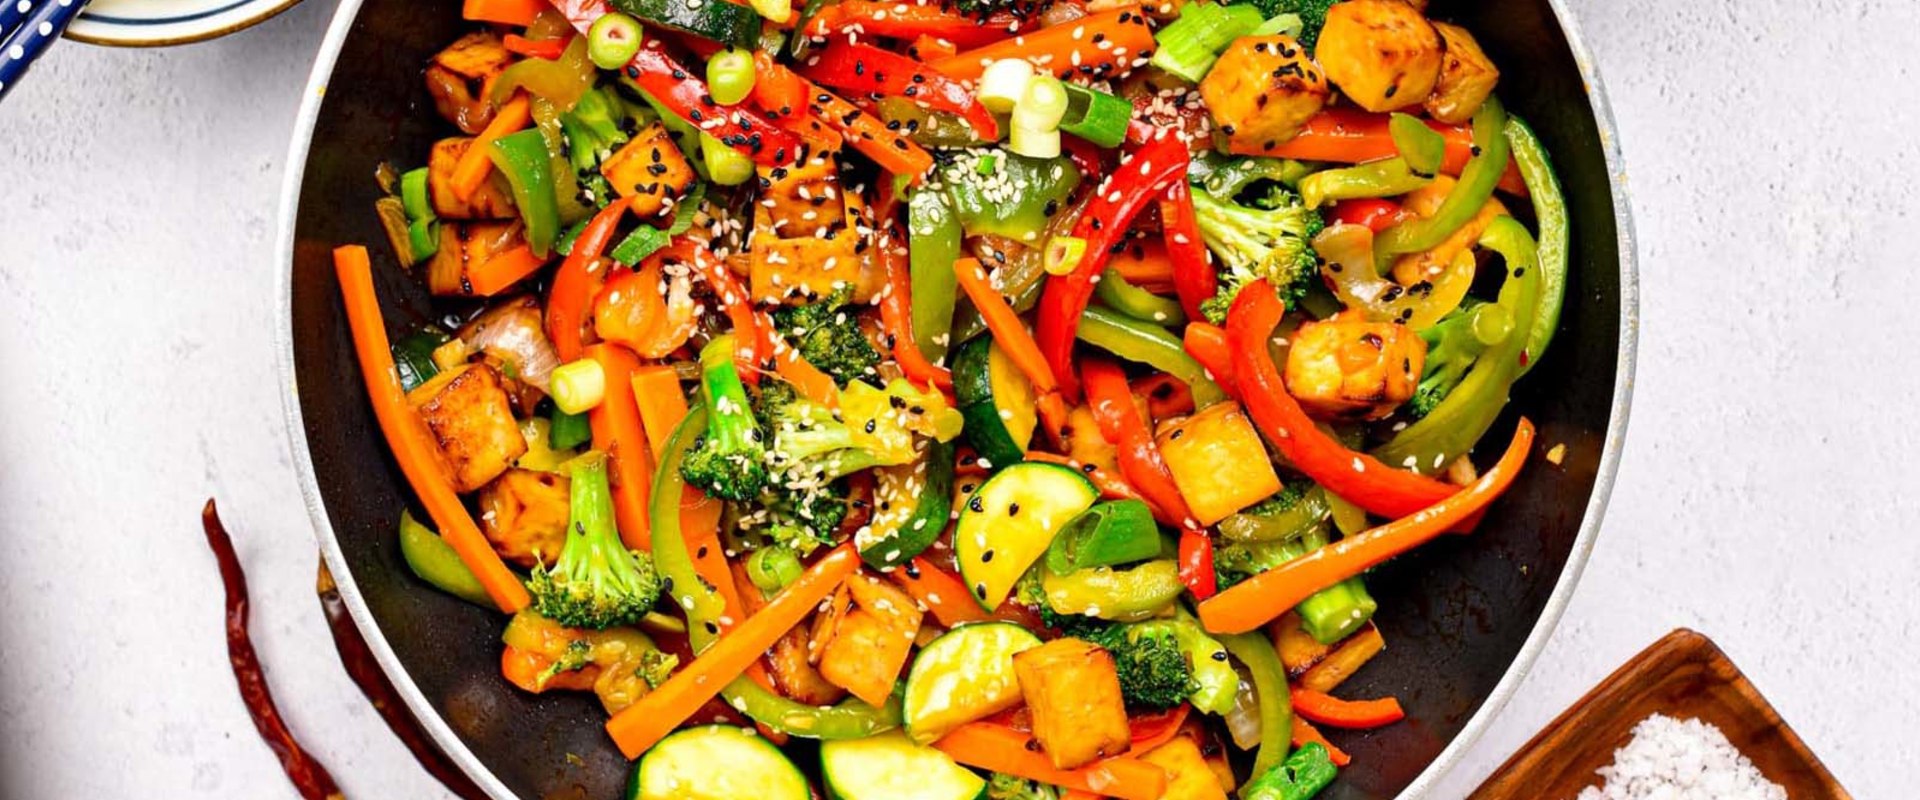 A Beginner's Guide to Common Stir-Fry Ingredients in Chinese Cuisine